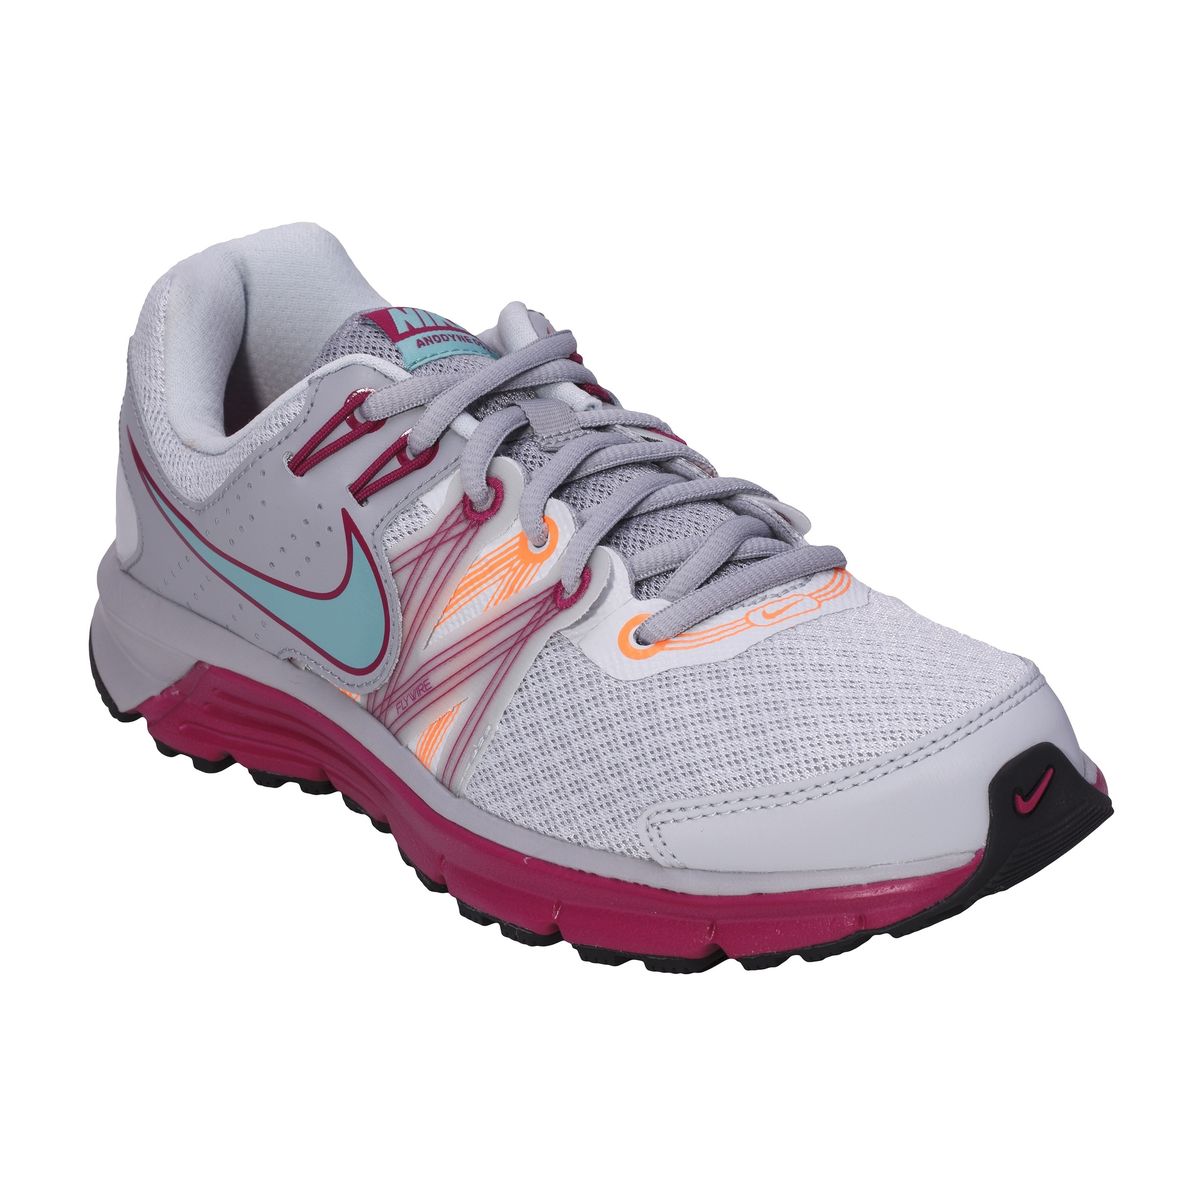 Womens Nike Anodyne Ds 2 Running Shoe | Buy Online in South Africa | www.bagssaleusa.com/louis-vuitton/